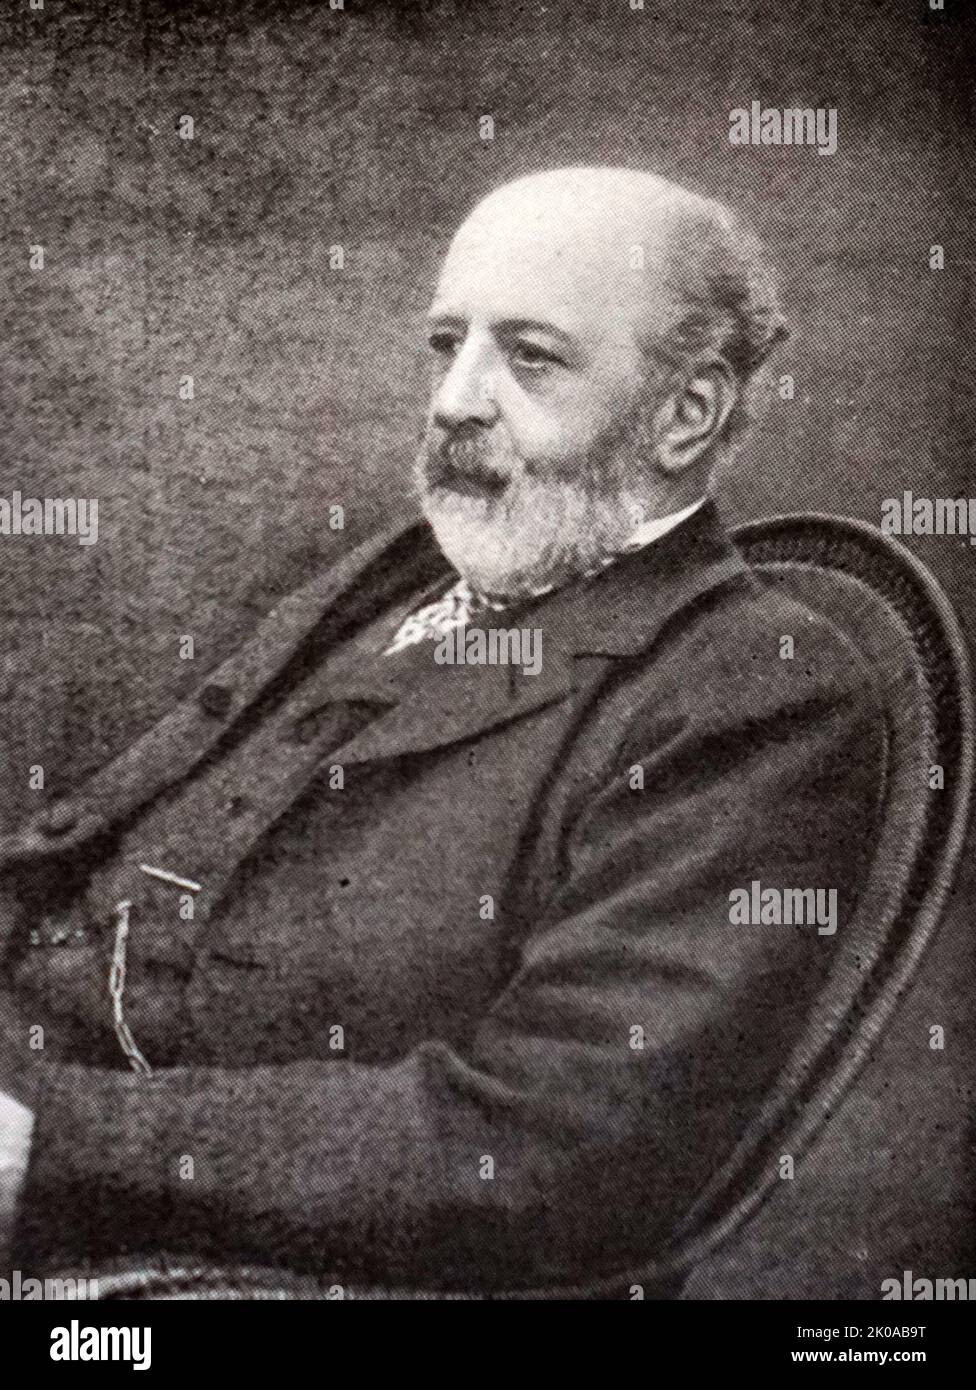 Nathaniel Mayer Rothschild, 1st Baron Rothschild, Baron de Rothschild GCVO, PC (8 November 1840 - 31 March 1915) was a British banker and politician from the wealthy international Rothschild family Stock Photo